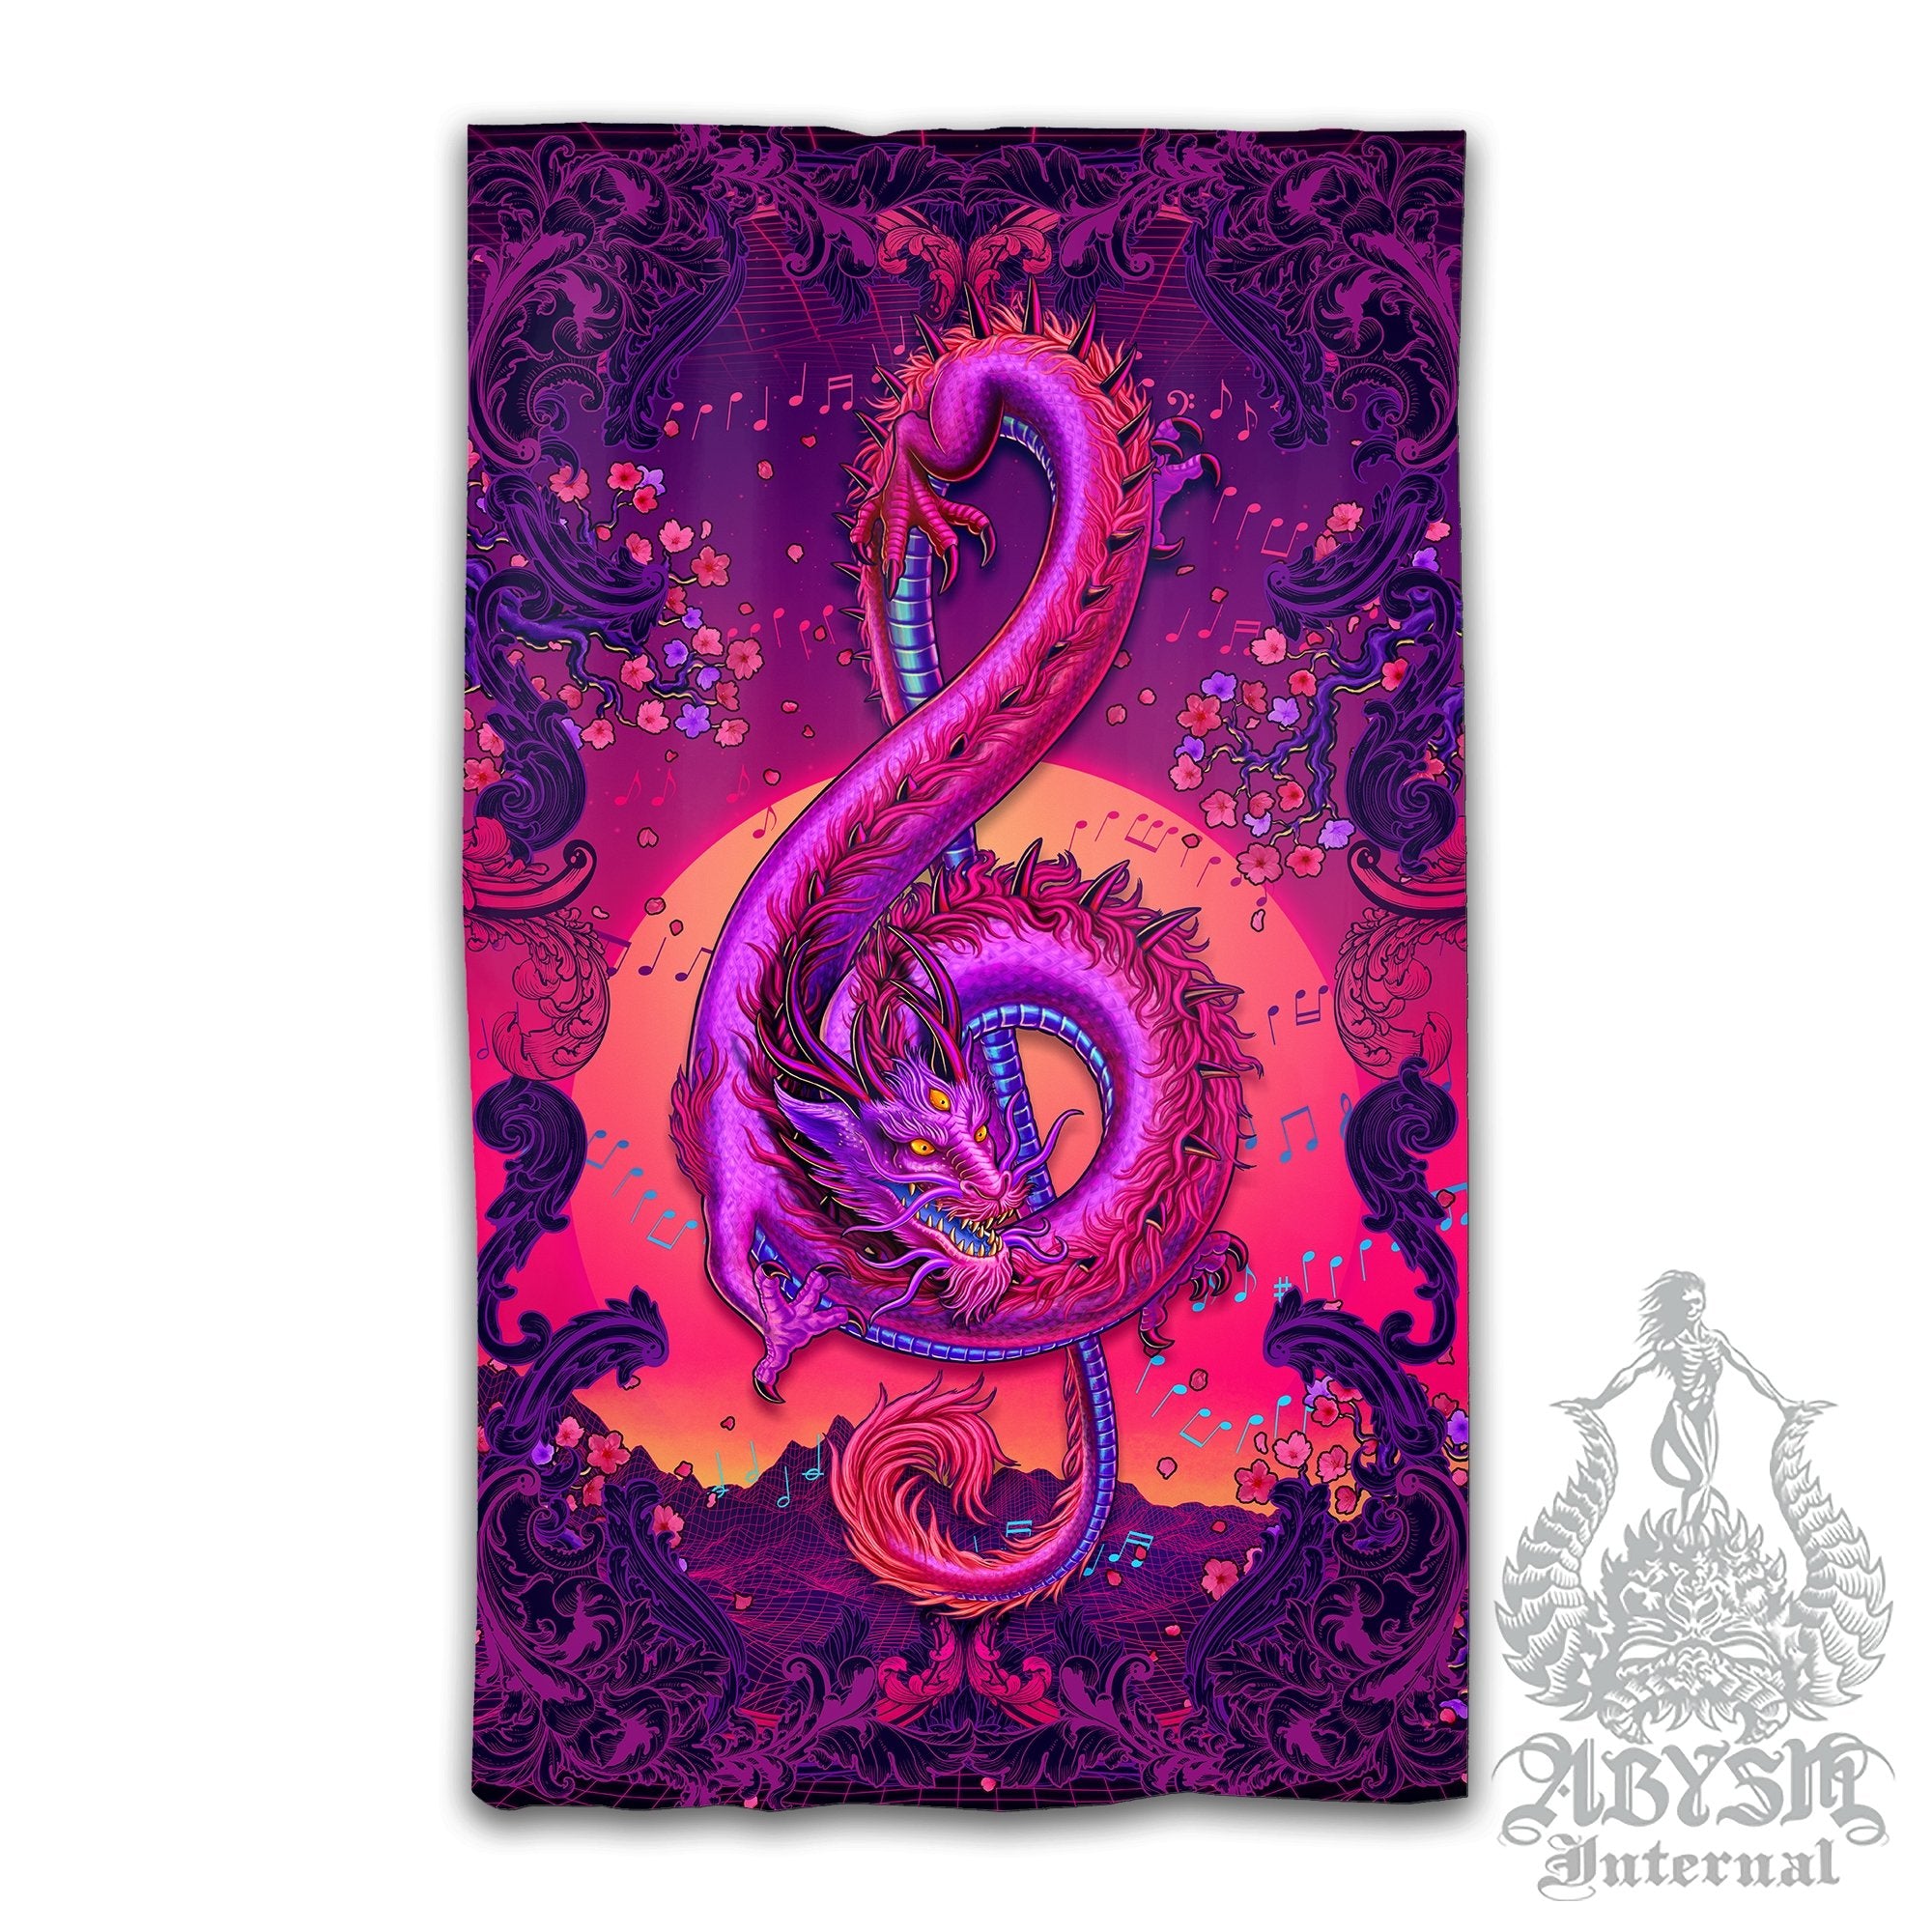 Synthwave Blackout Curtains, Long Window Panels, Psychedelic Art Print, Vaporwave Room Decor, 80s Gamer Retrowave Home and Shop Decor - Music Dragon - Abysm Internal